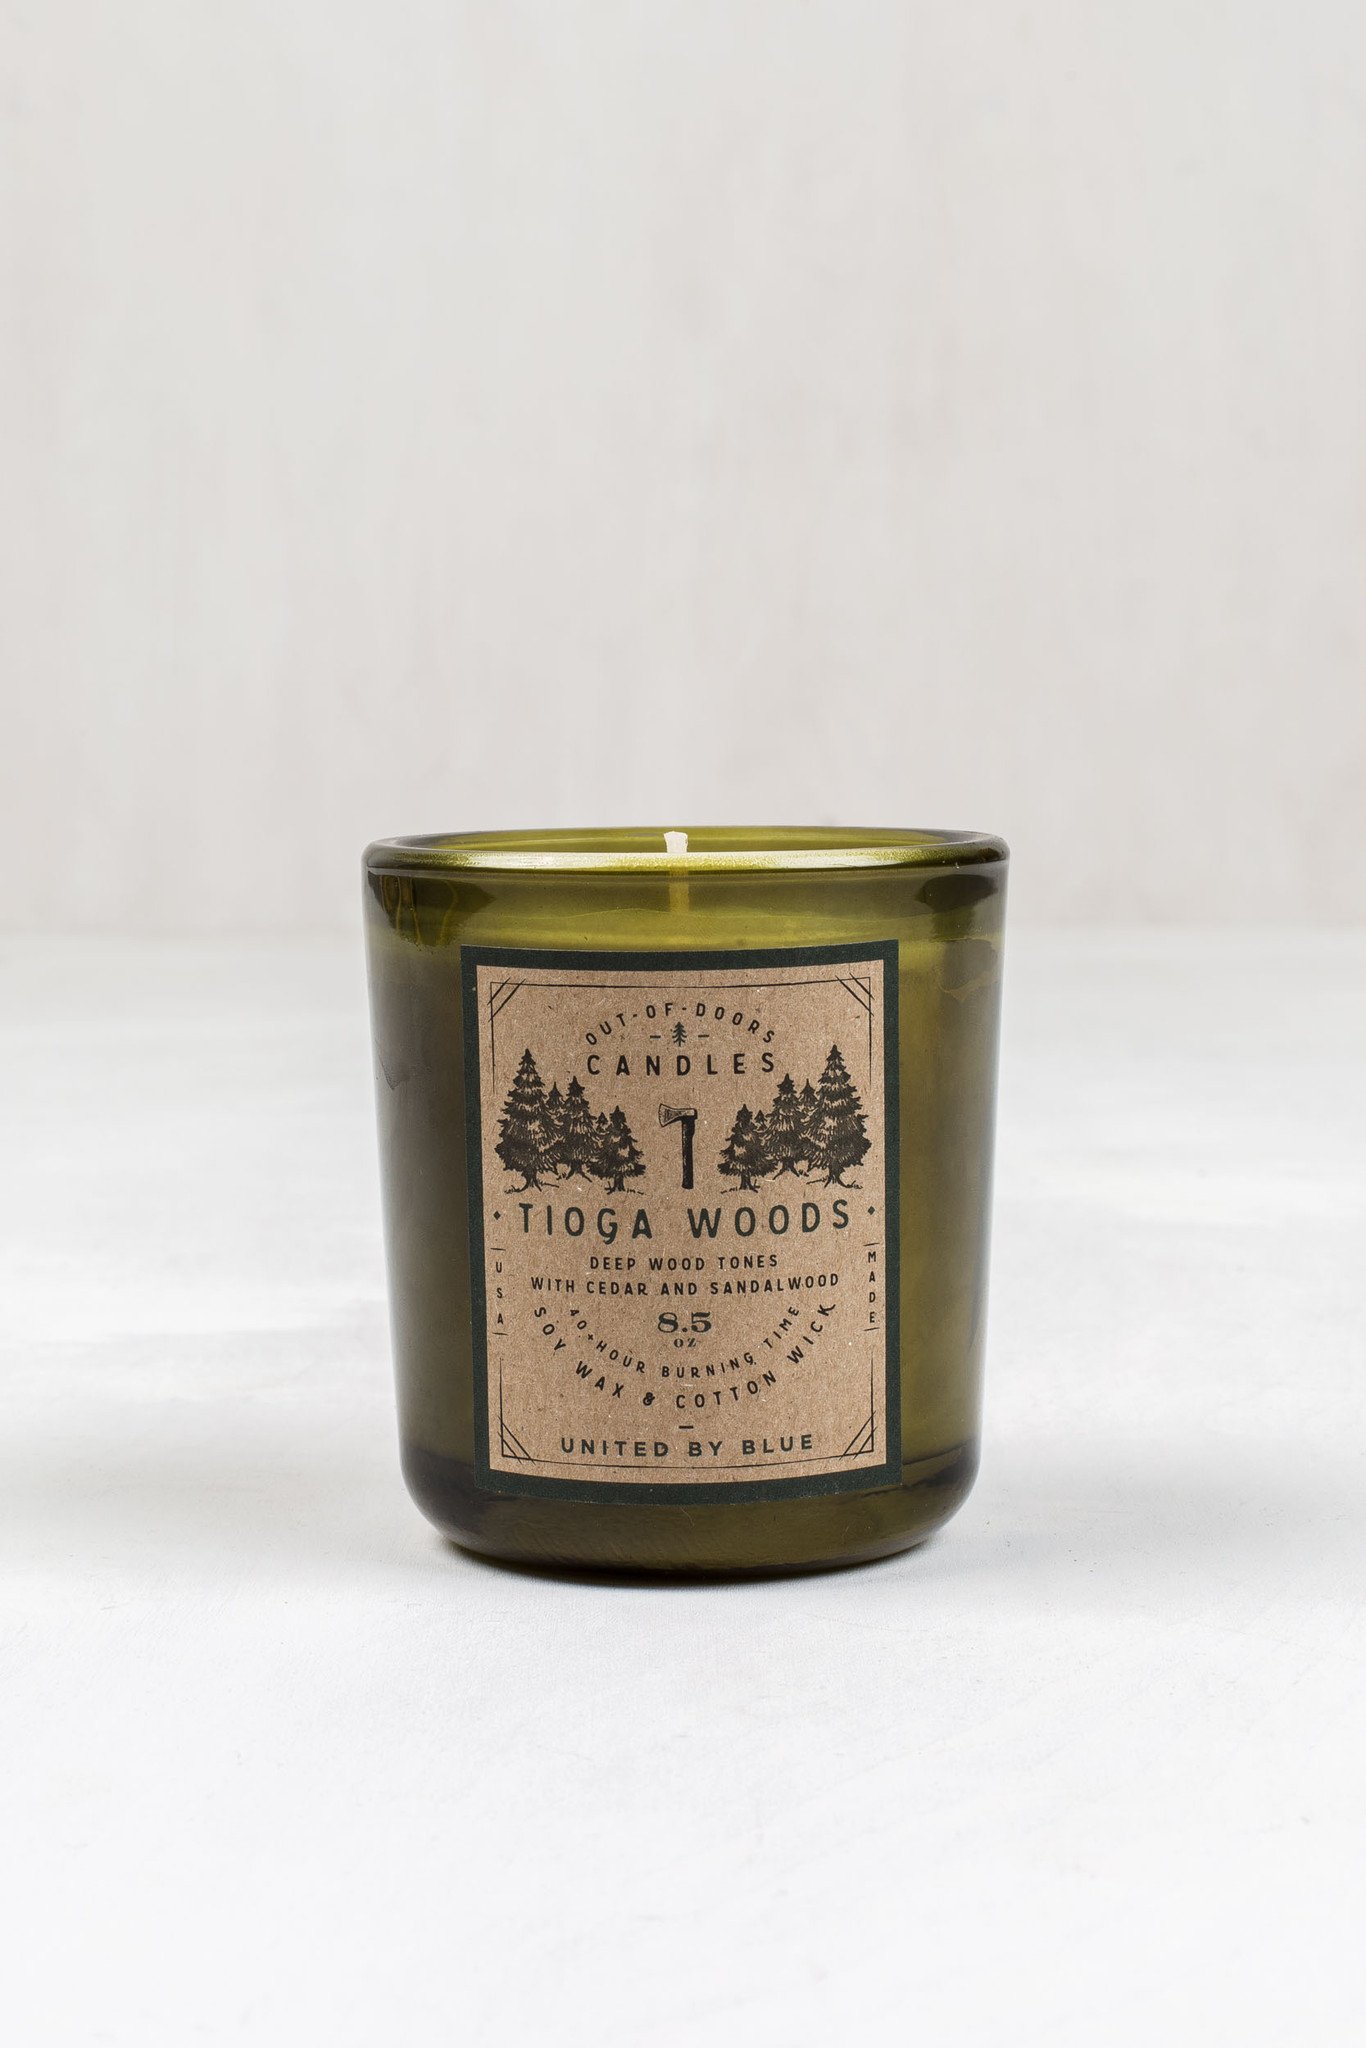 8.5 oz. Tioga Woods Out-of-Doors Candle | United By Blue